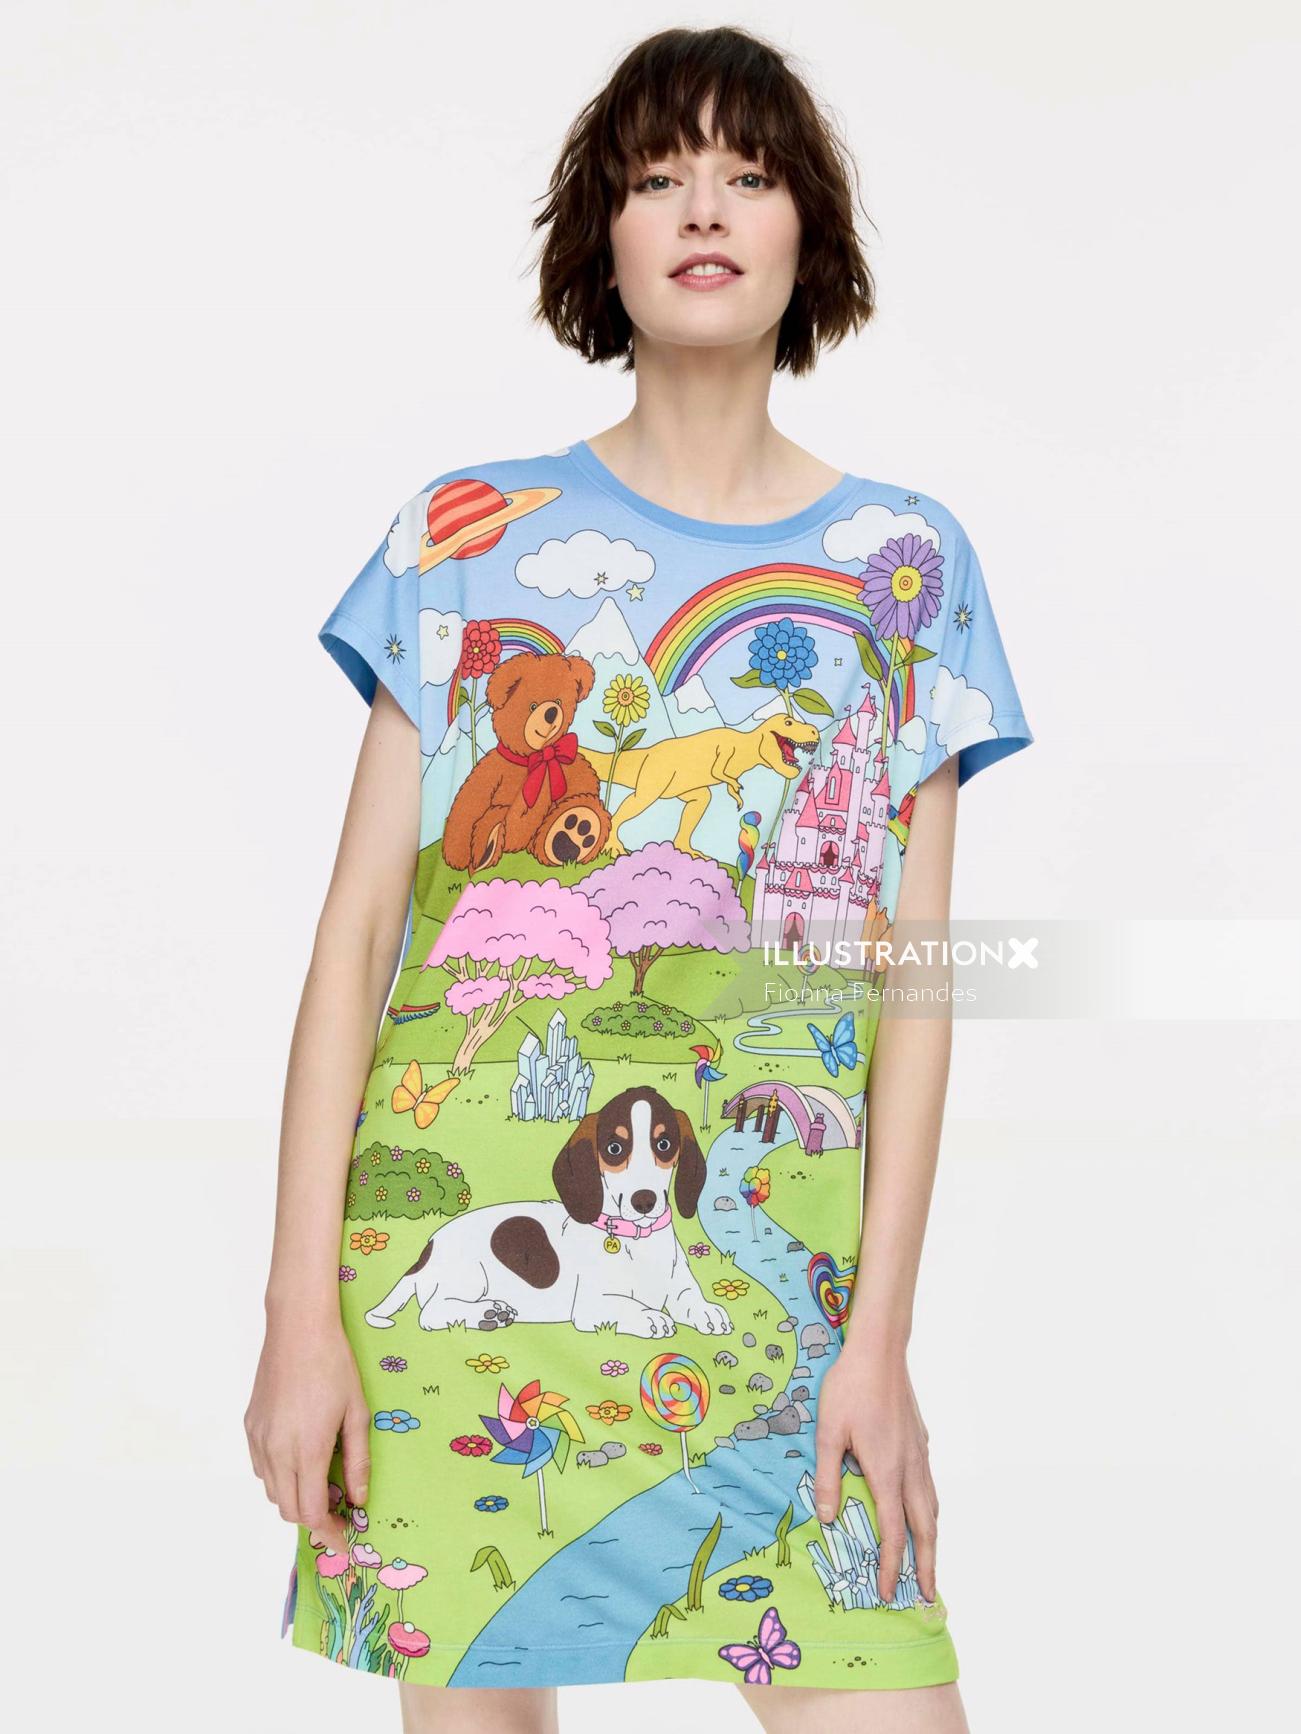 Peter Alexander's "Big Night In Festival Collection" illustration